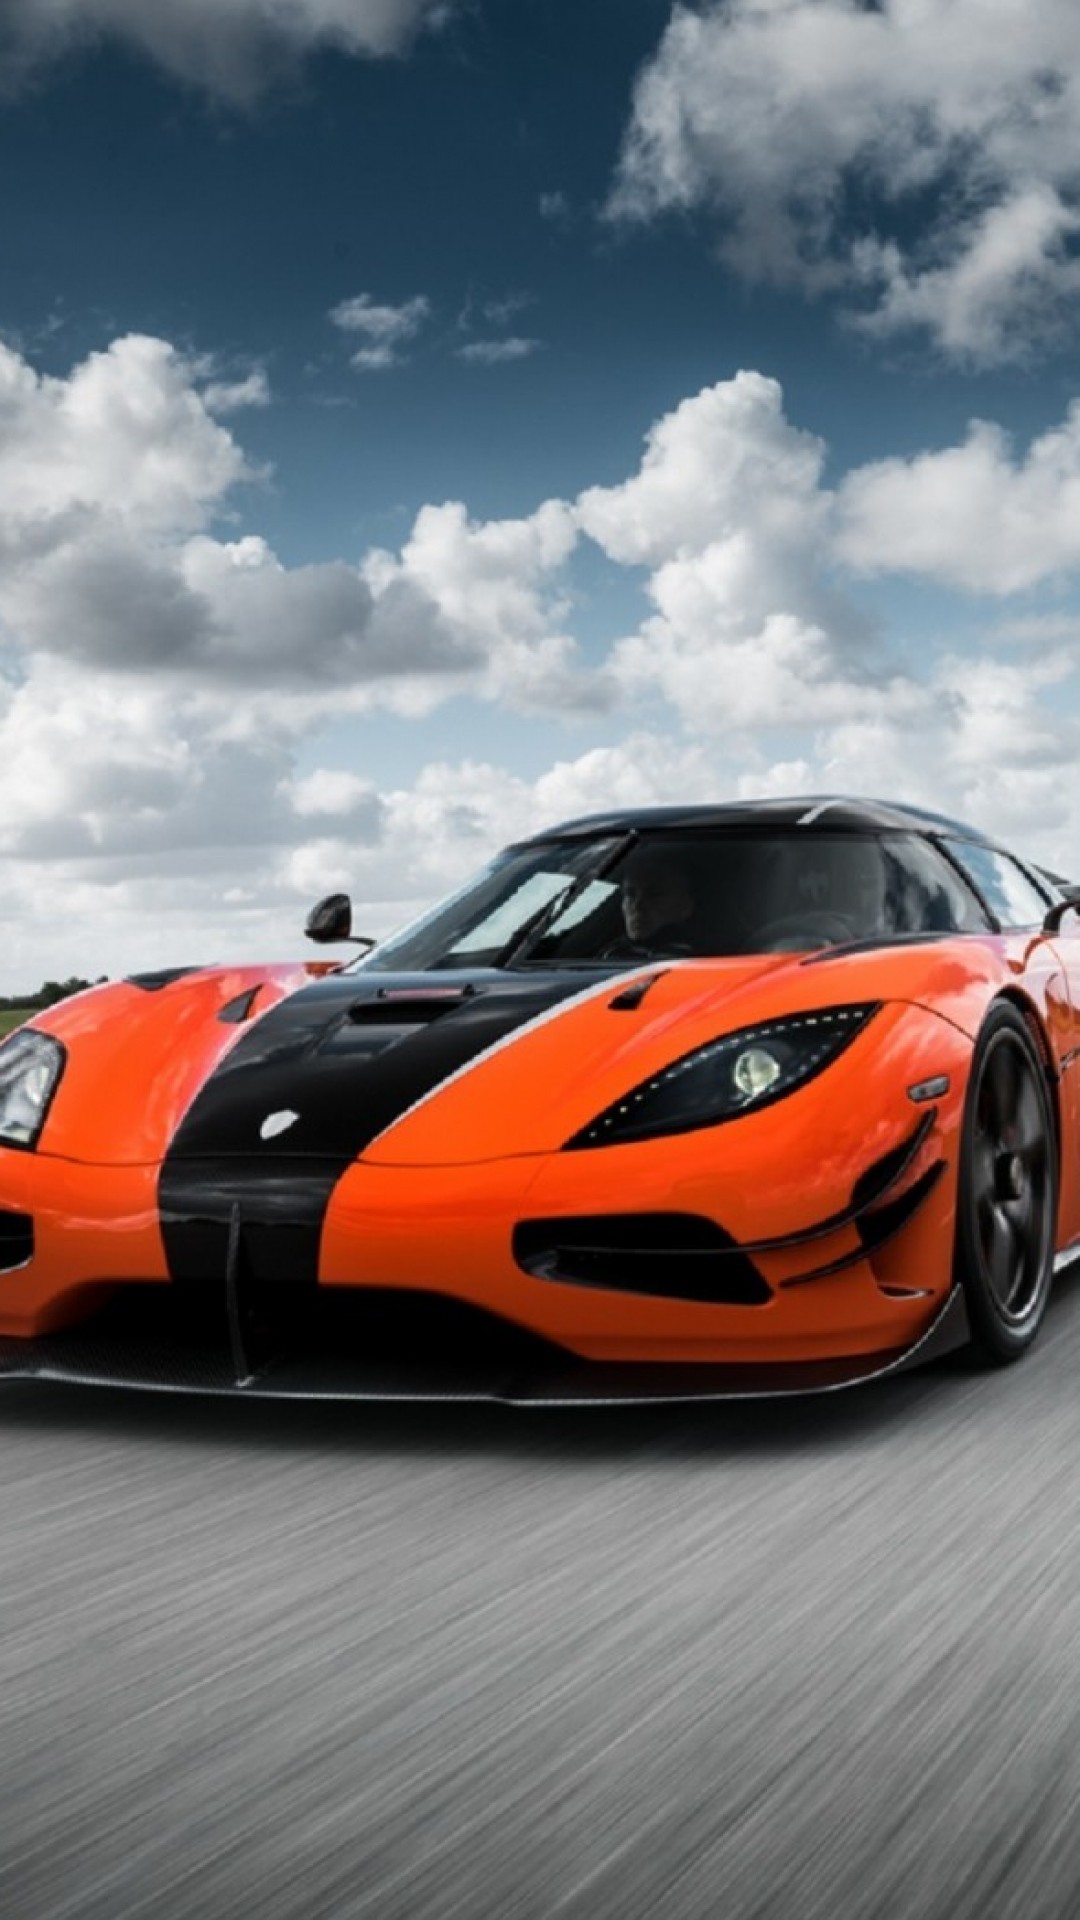 Preview Wallpaper Koenigsegg Agera Front View Data Src Koenigsegg Agera Xs 1080x1920 Wallpaper Teahub Io